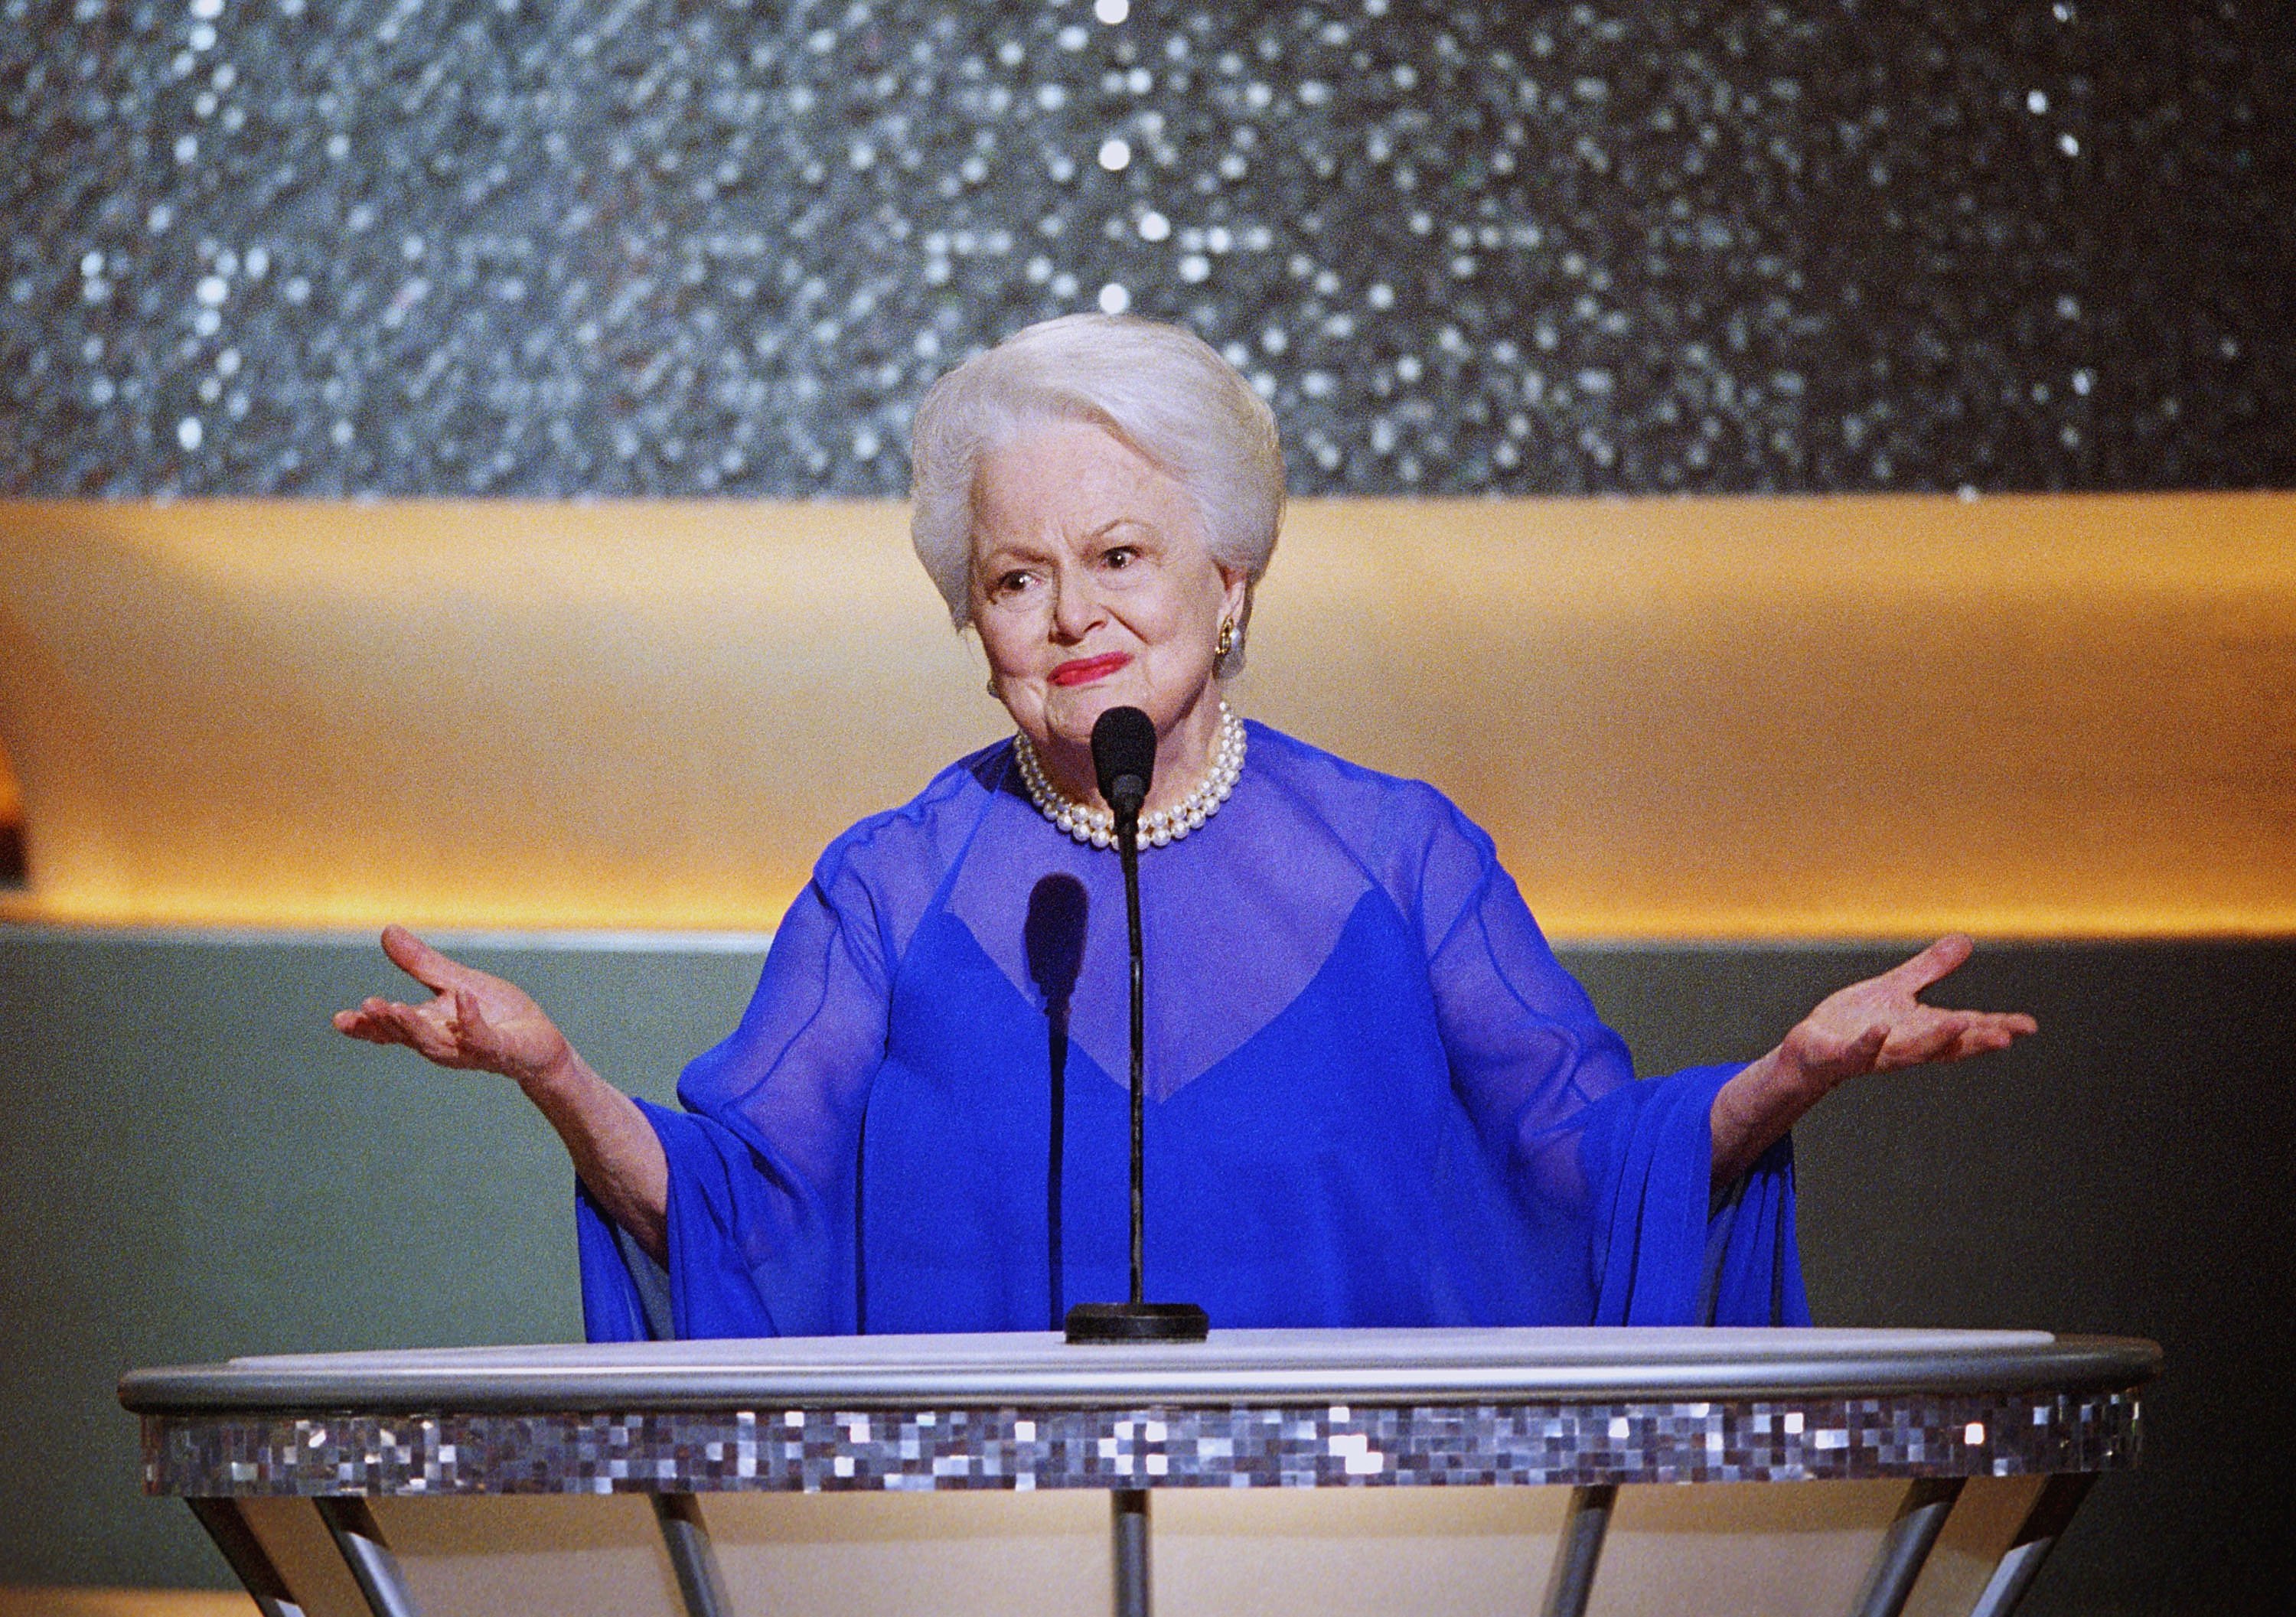 Best Actress Oscar winner Olivia de Havilland (To Each His Own, 1946) introduces other former winners in acting categories for a group presentation during the 75th Annual Academy Awards at the Kodak Theater on March 23, 2003. | Photo: Getty Images